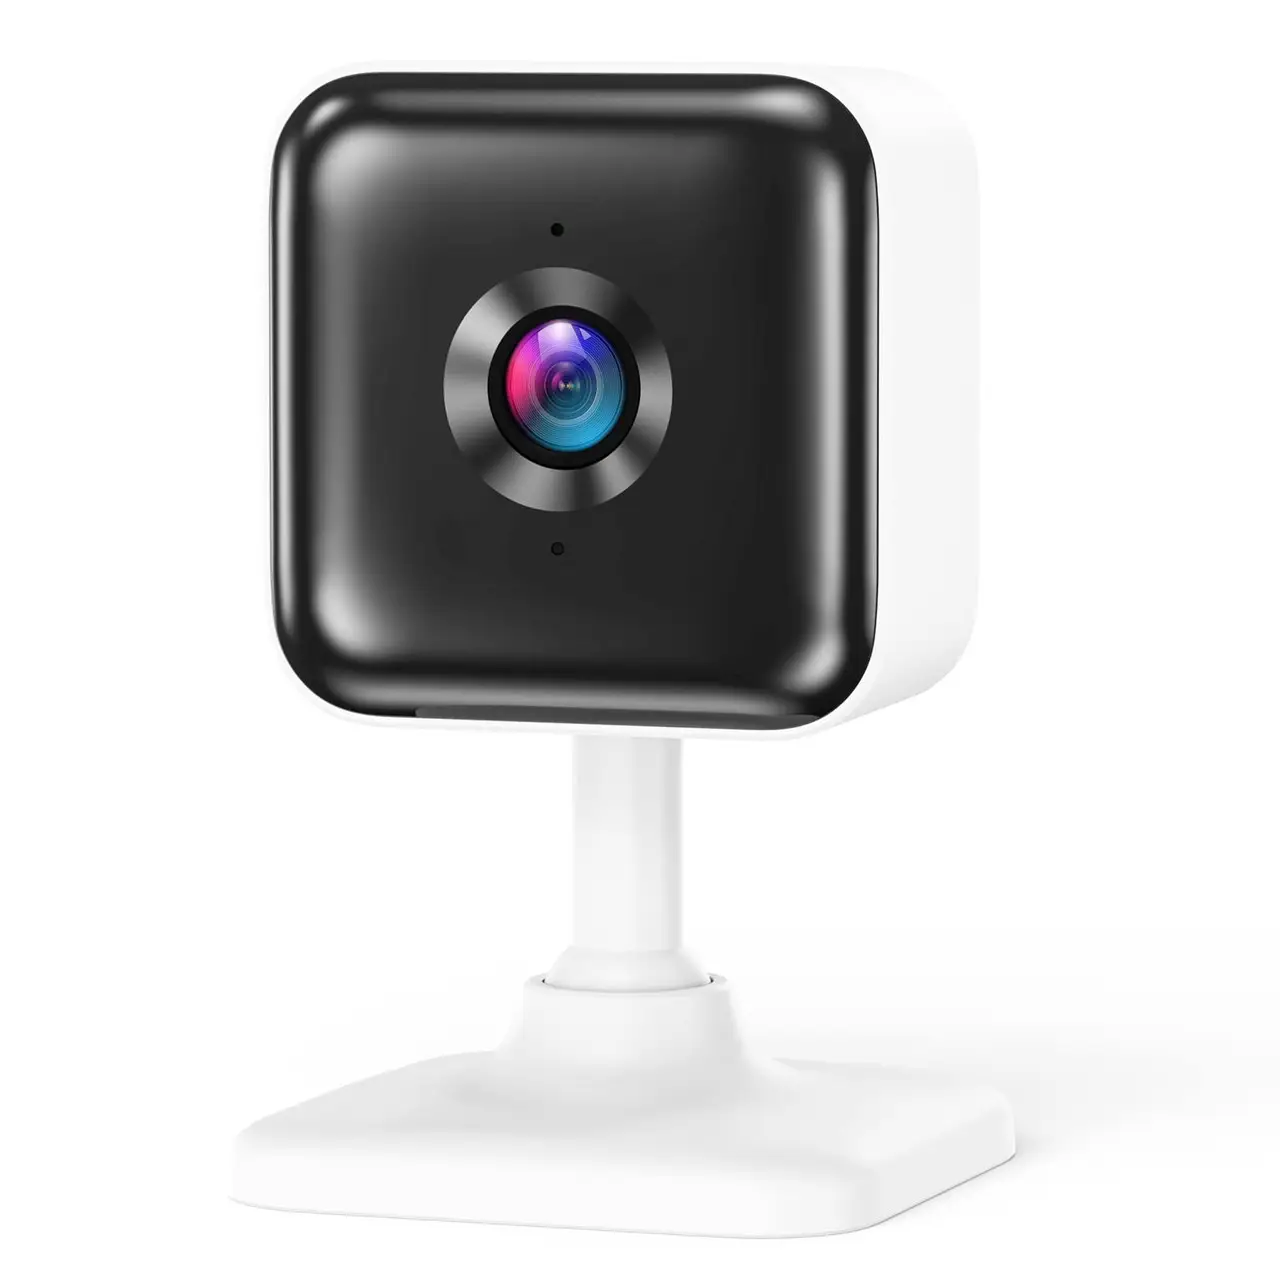 SentryGuard Smart Home Security Camera - Your Watchful Eye, Anytime, Anywhere